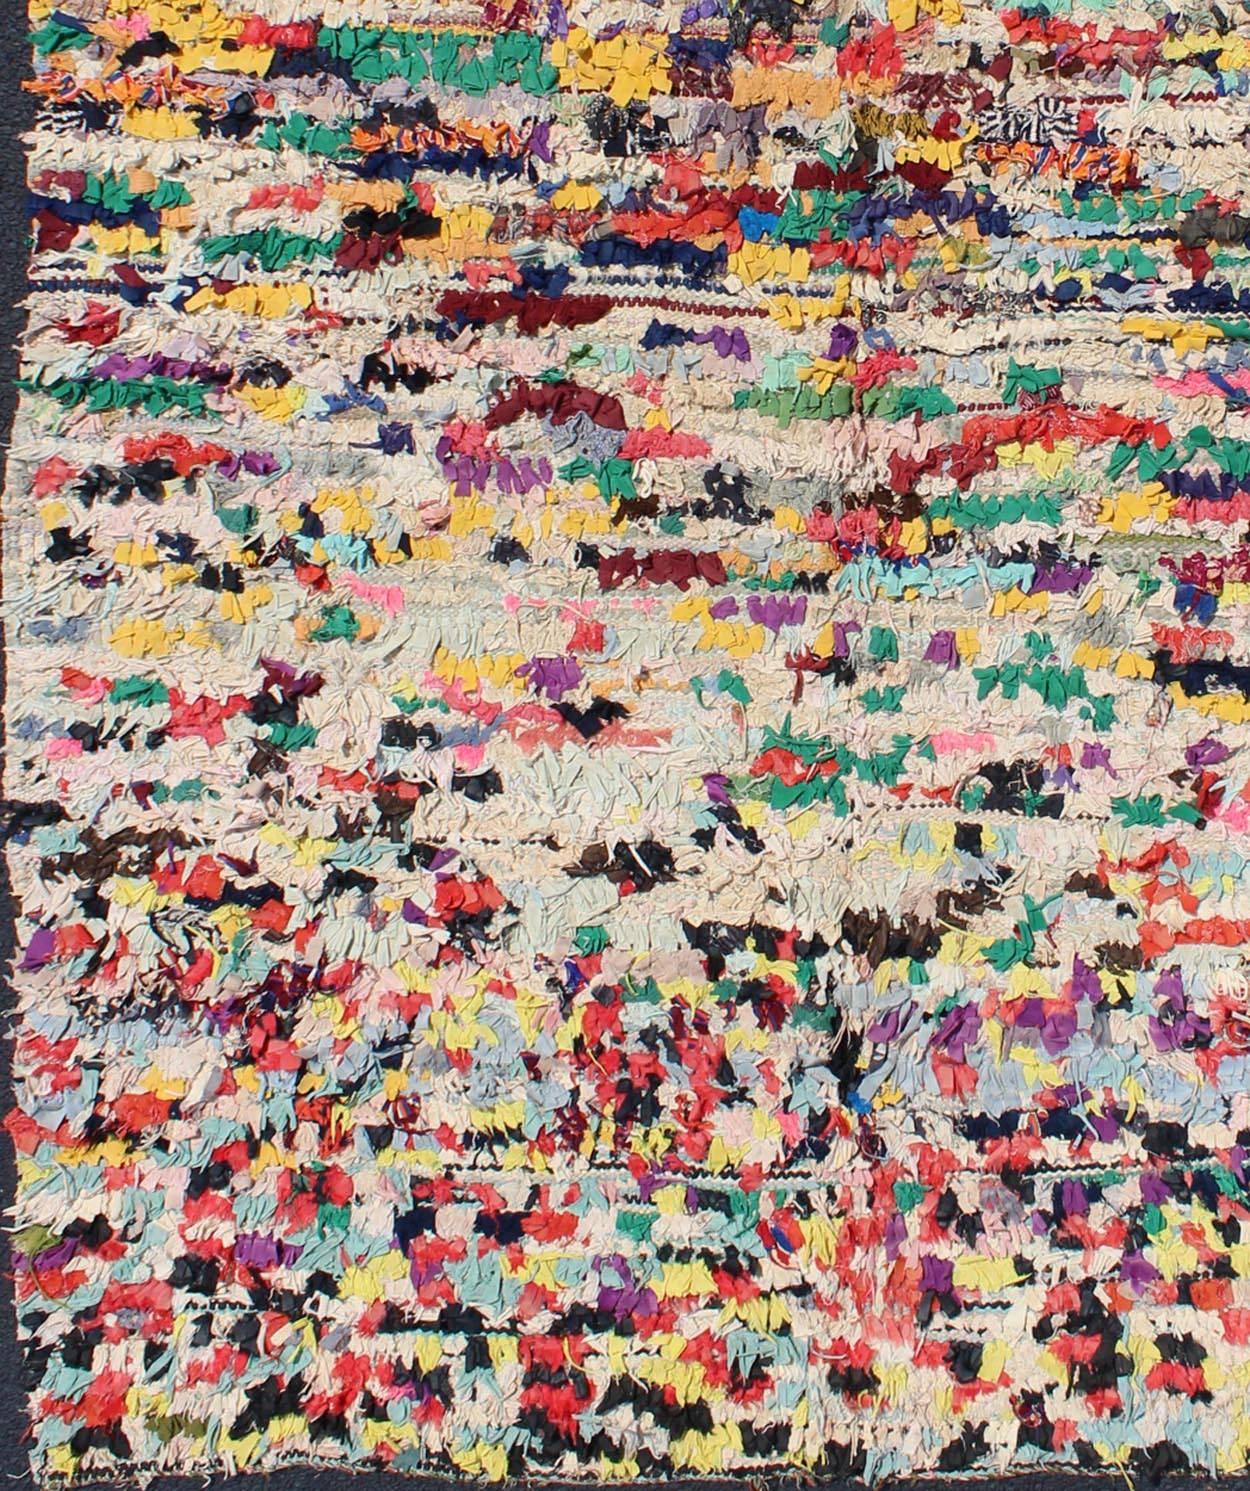 Vintage Moroccan Rag Rug with checkered Design in Multi Colors    SK-18838, Large Vintage Moroccan Boucherouite Rug, Large Rag Rug -5'2 X 7'3
Woven entirely with cut-up pieces of fabric from old clothes this, Mid-Century Moroccan features colorful